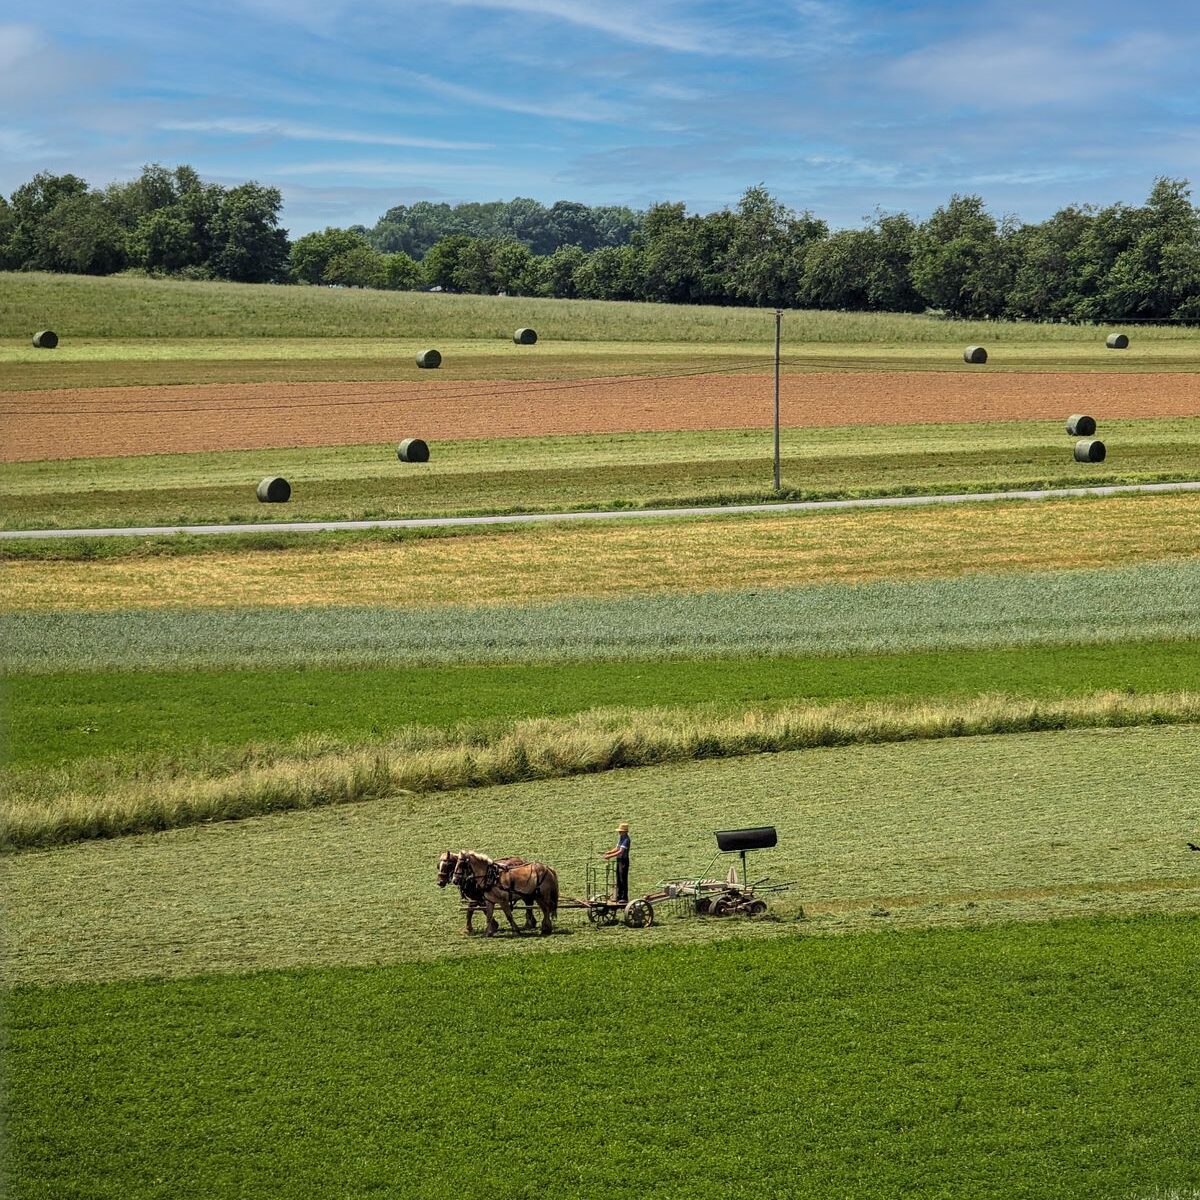 A rural landscape with fields of different crops in various shades of green and brown. In the foreground, two horses are pulling a farm implement across a field. The background shows more fields, hay bales, and a line of trees under a blue sky with wispy clouds.